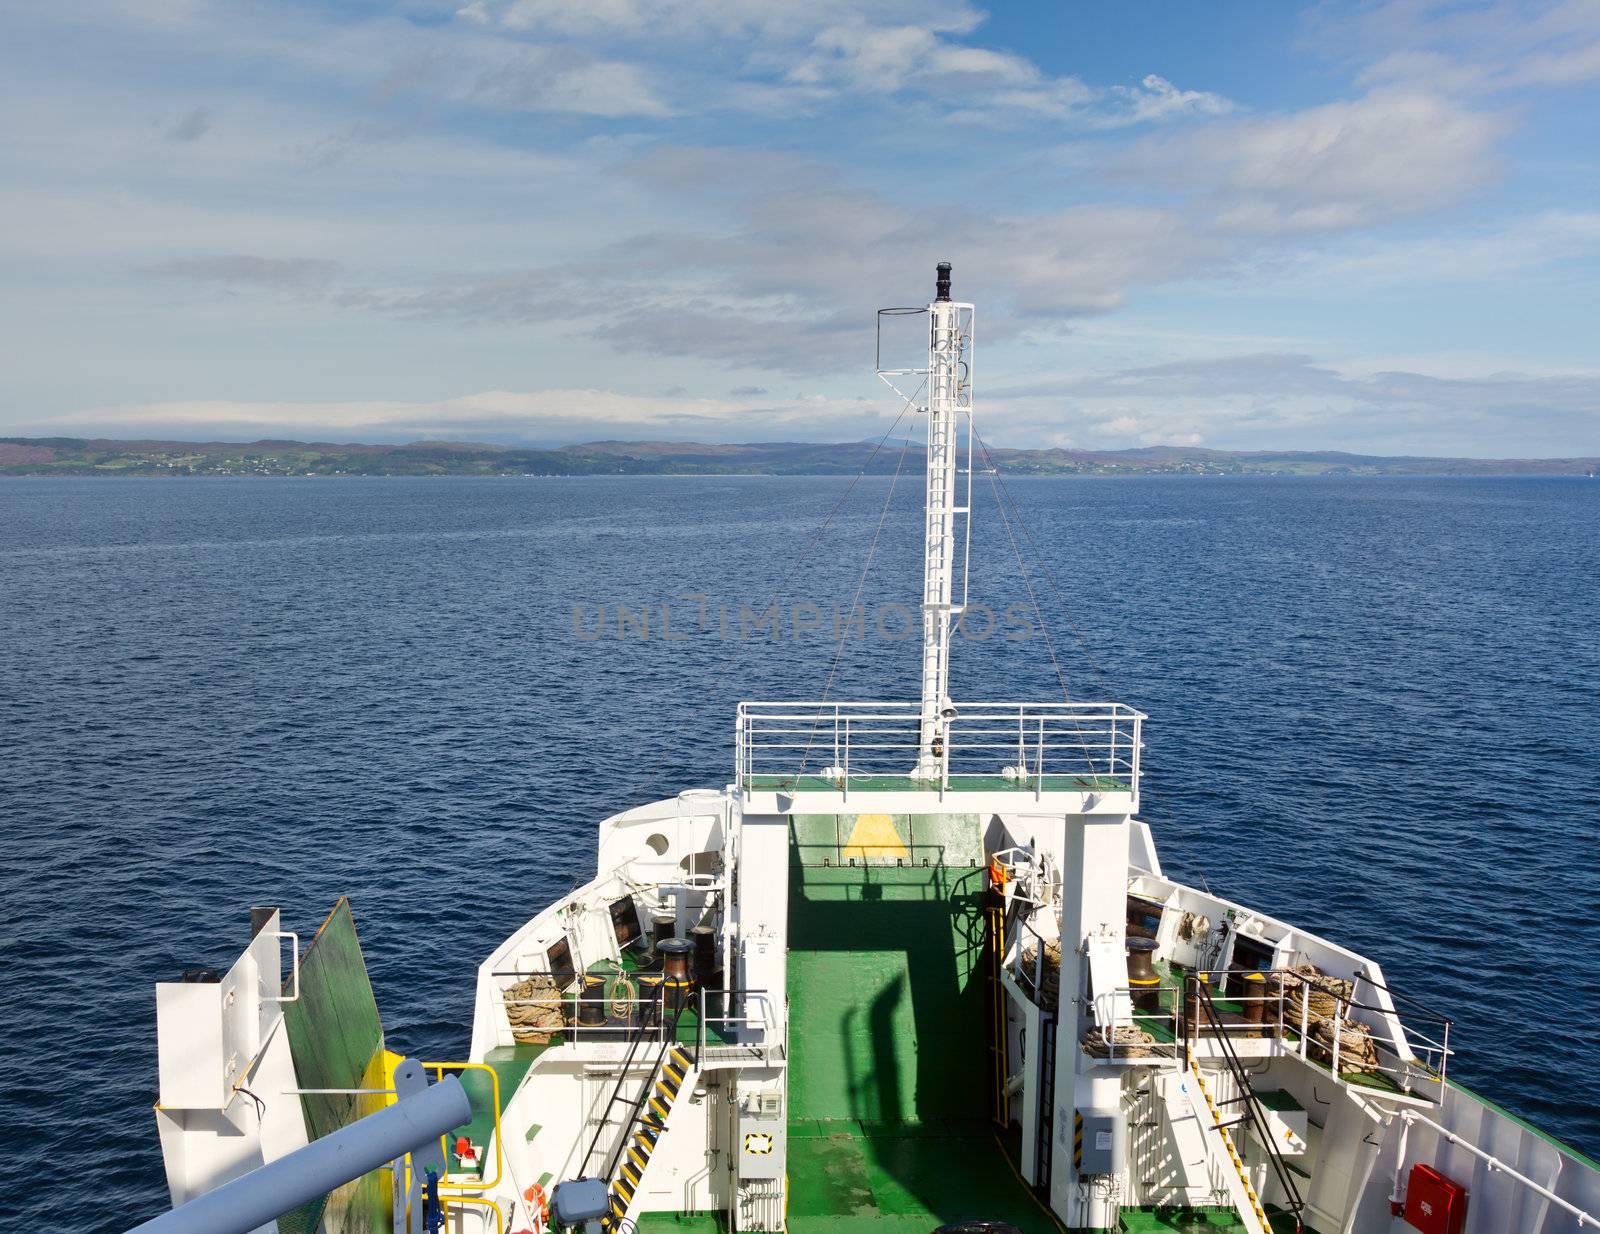 Passenger car ferry crossing the bay in Scotland